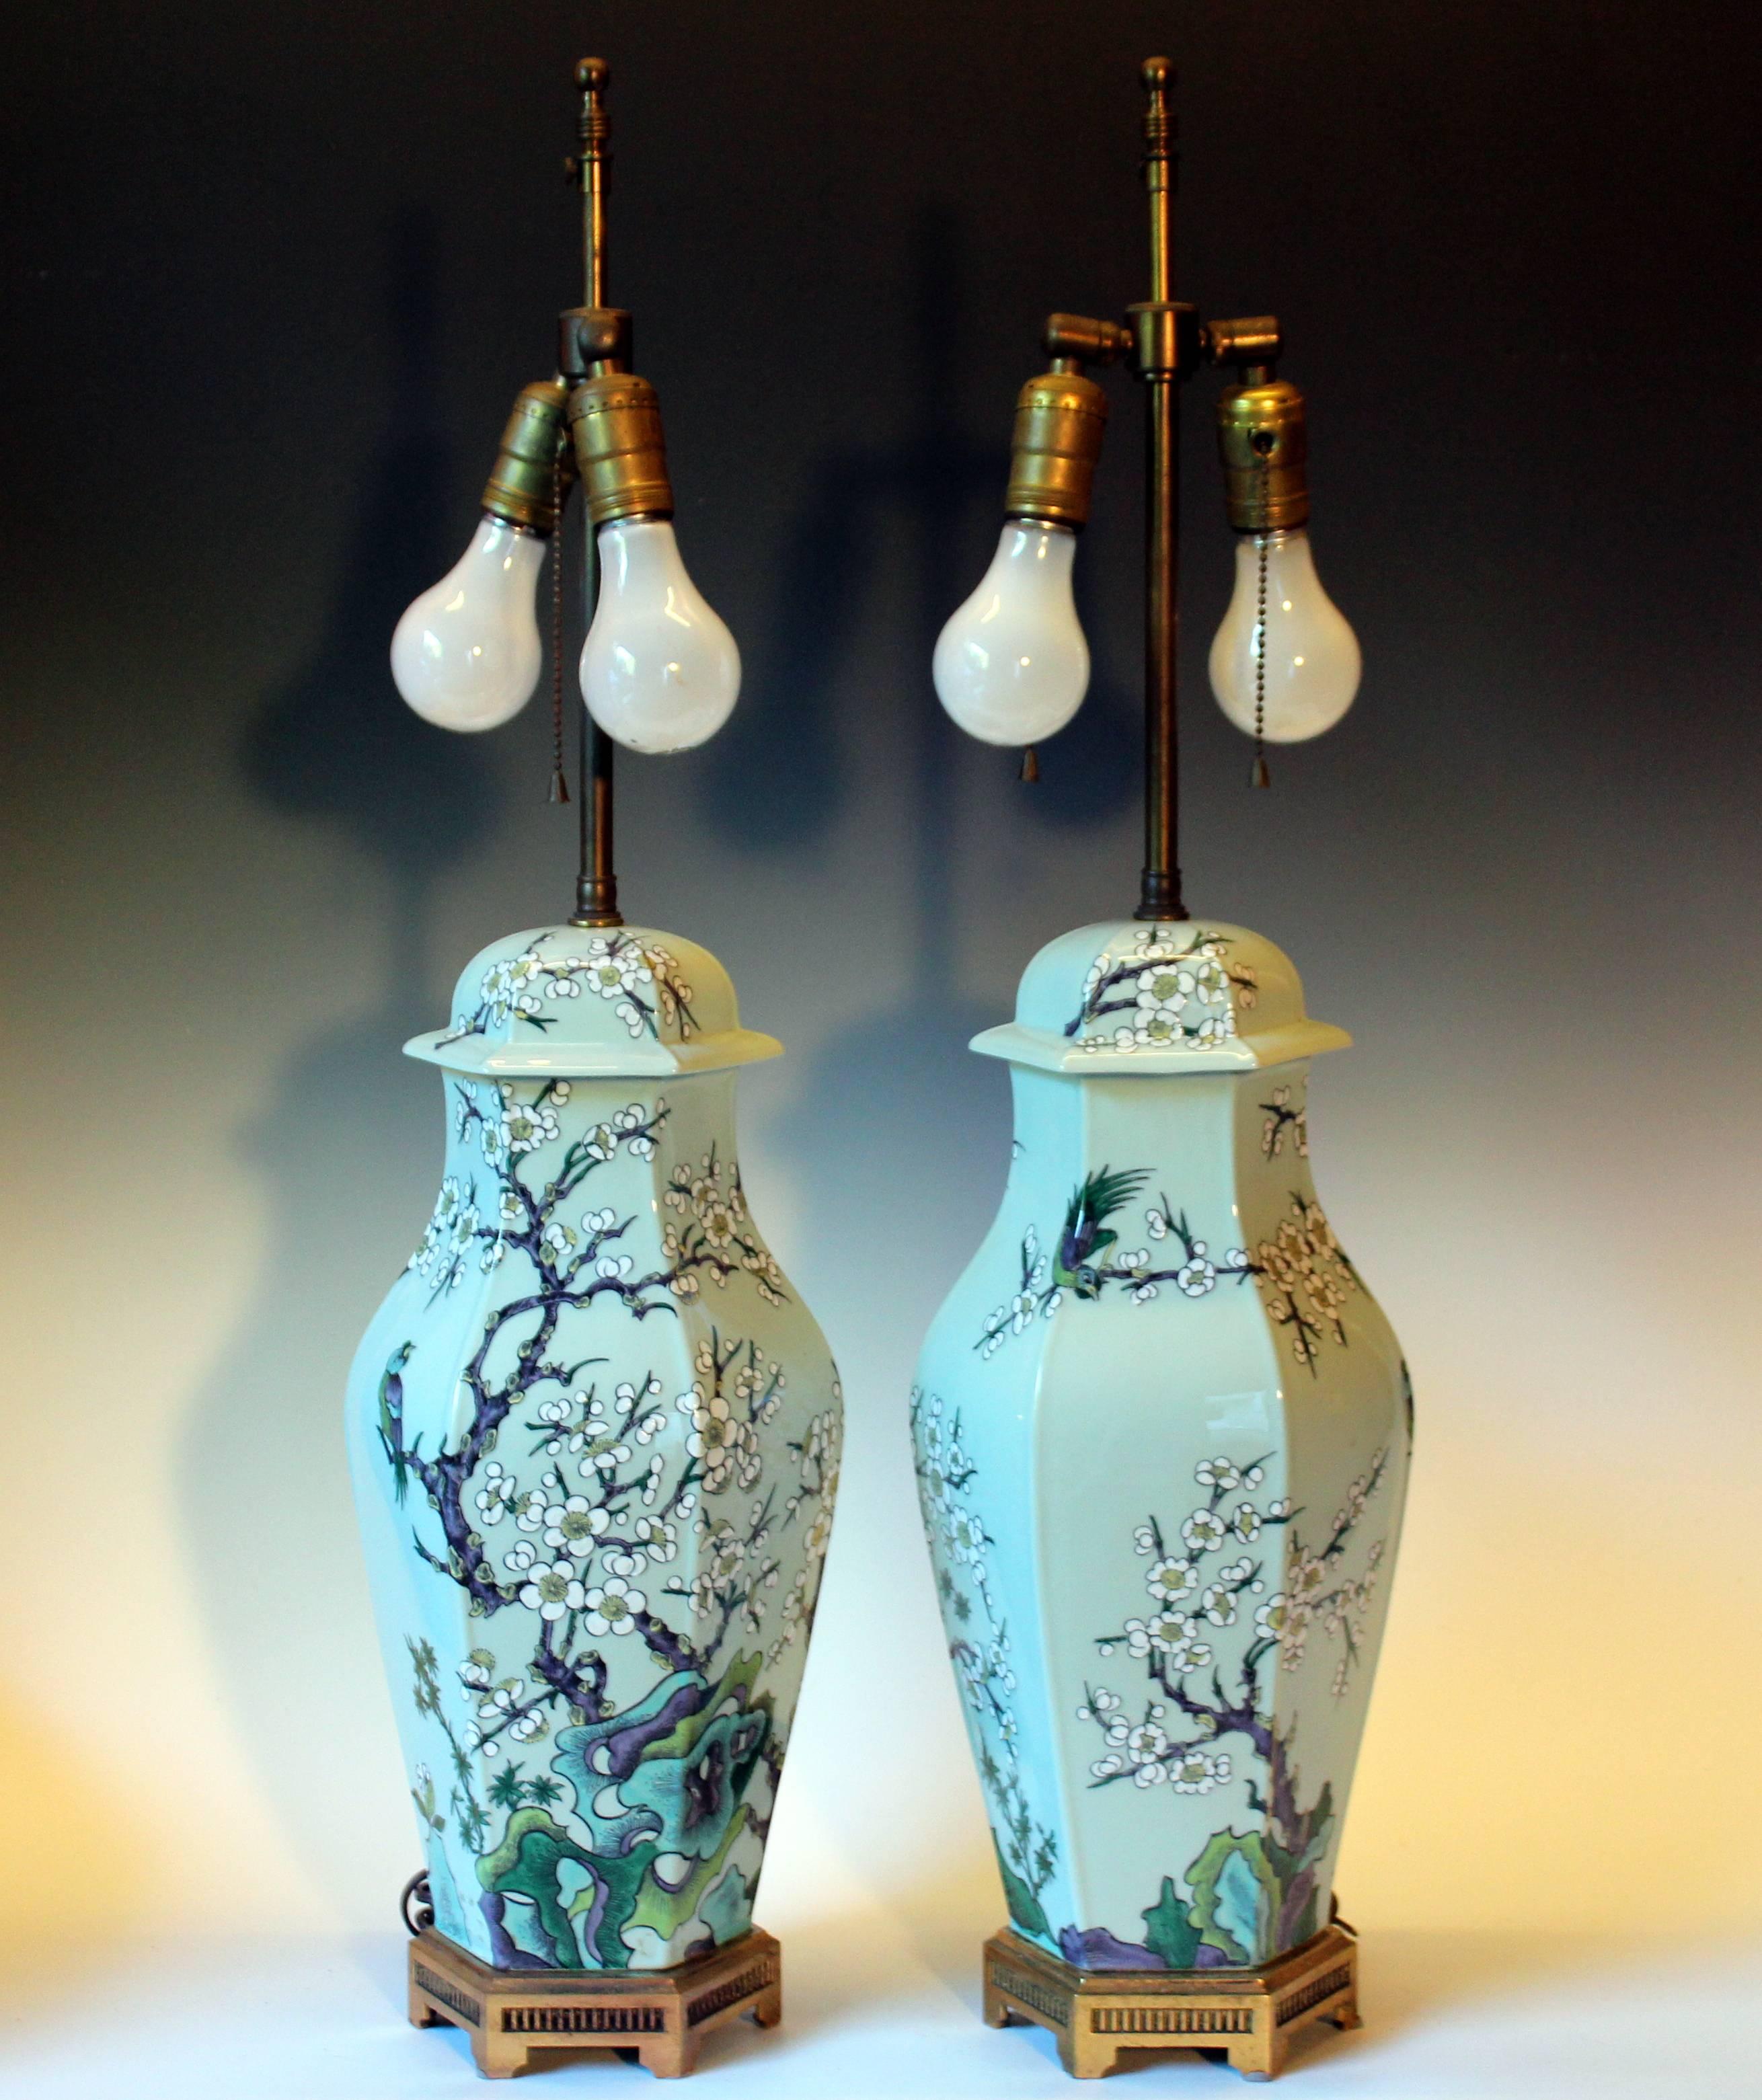 Large pair of Paul Hanson porcelain lamps with chinoiserie decoration depicting rock outcroppings, plum blossoms, and song birds against a pale celadon ground, circa 1960s. Nice quality brass hardware with double cluster articulated sockets and